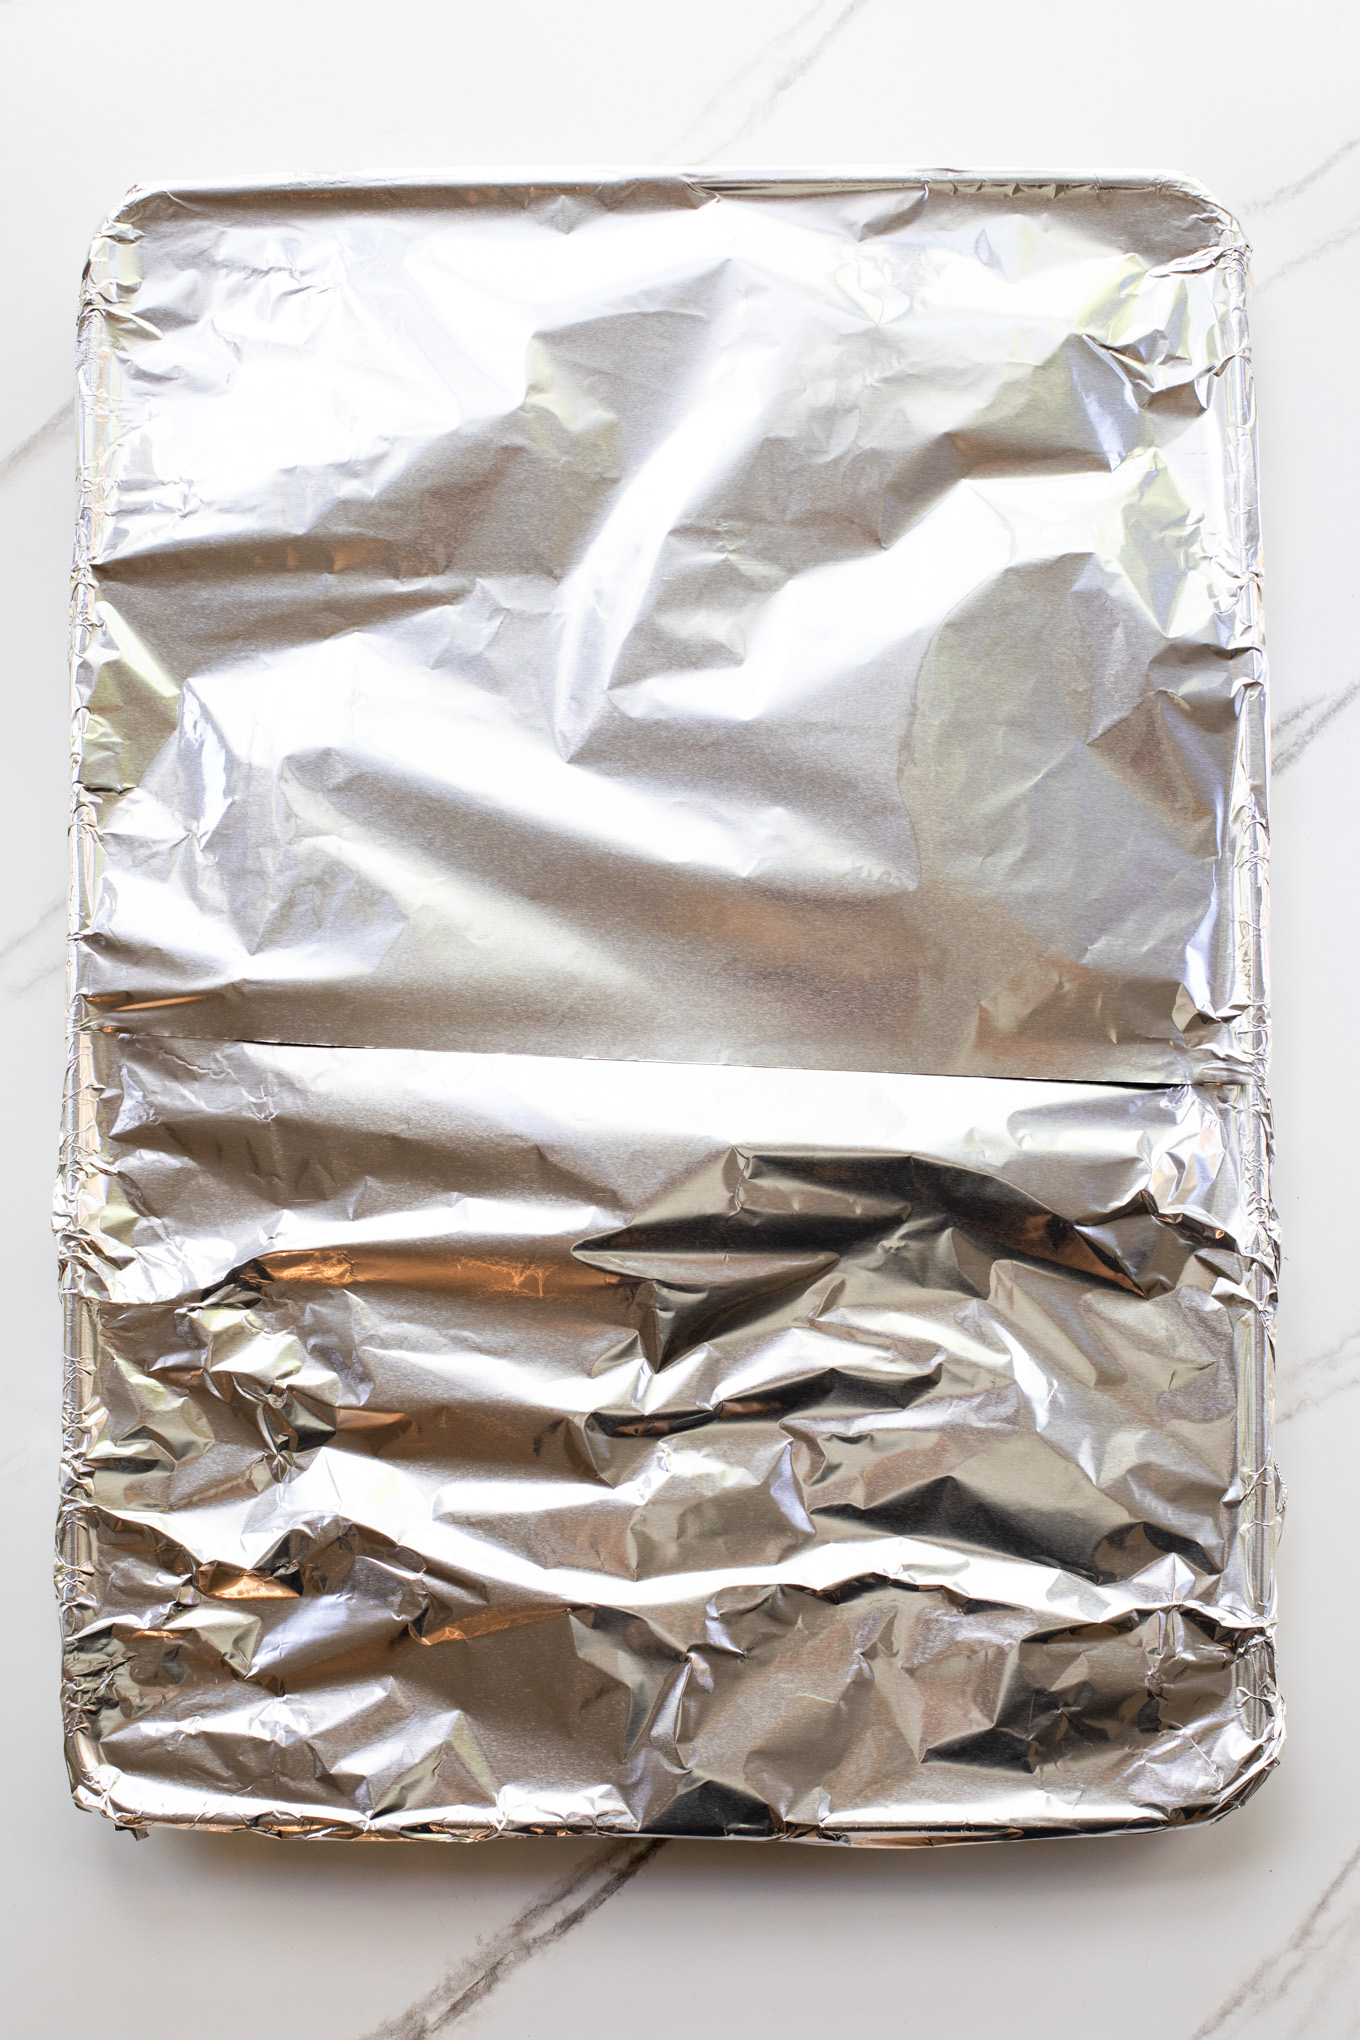 sheet pan covered with foil.